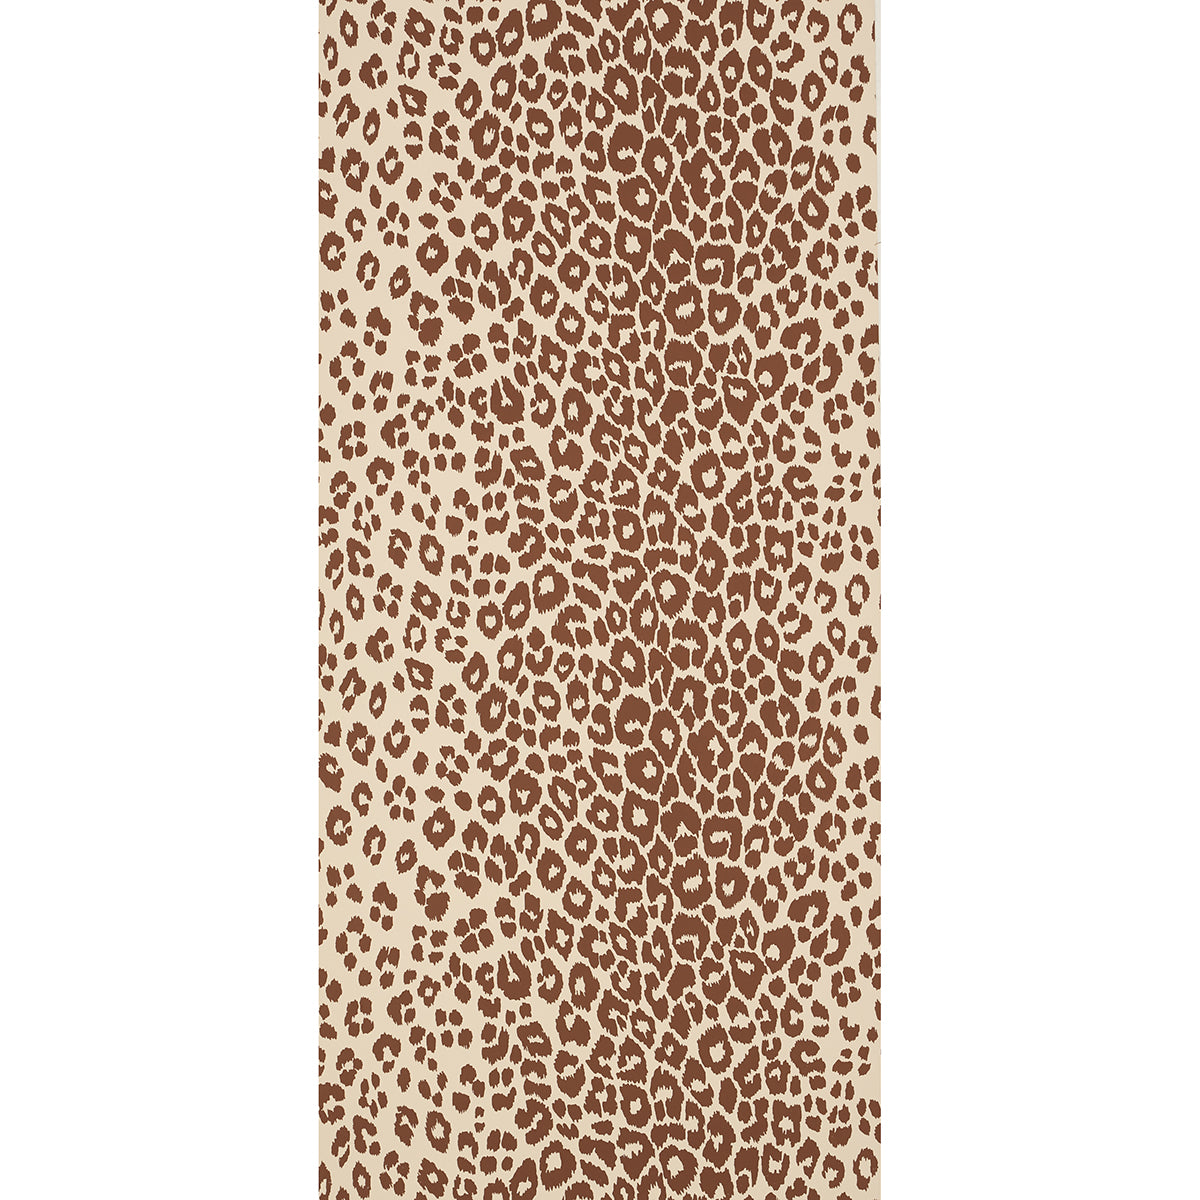 ICONIC LEOPARD | BROWN ON NEUTRAL